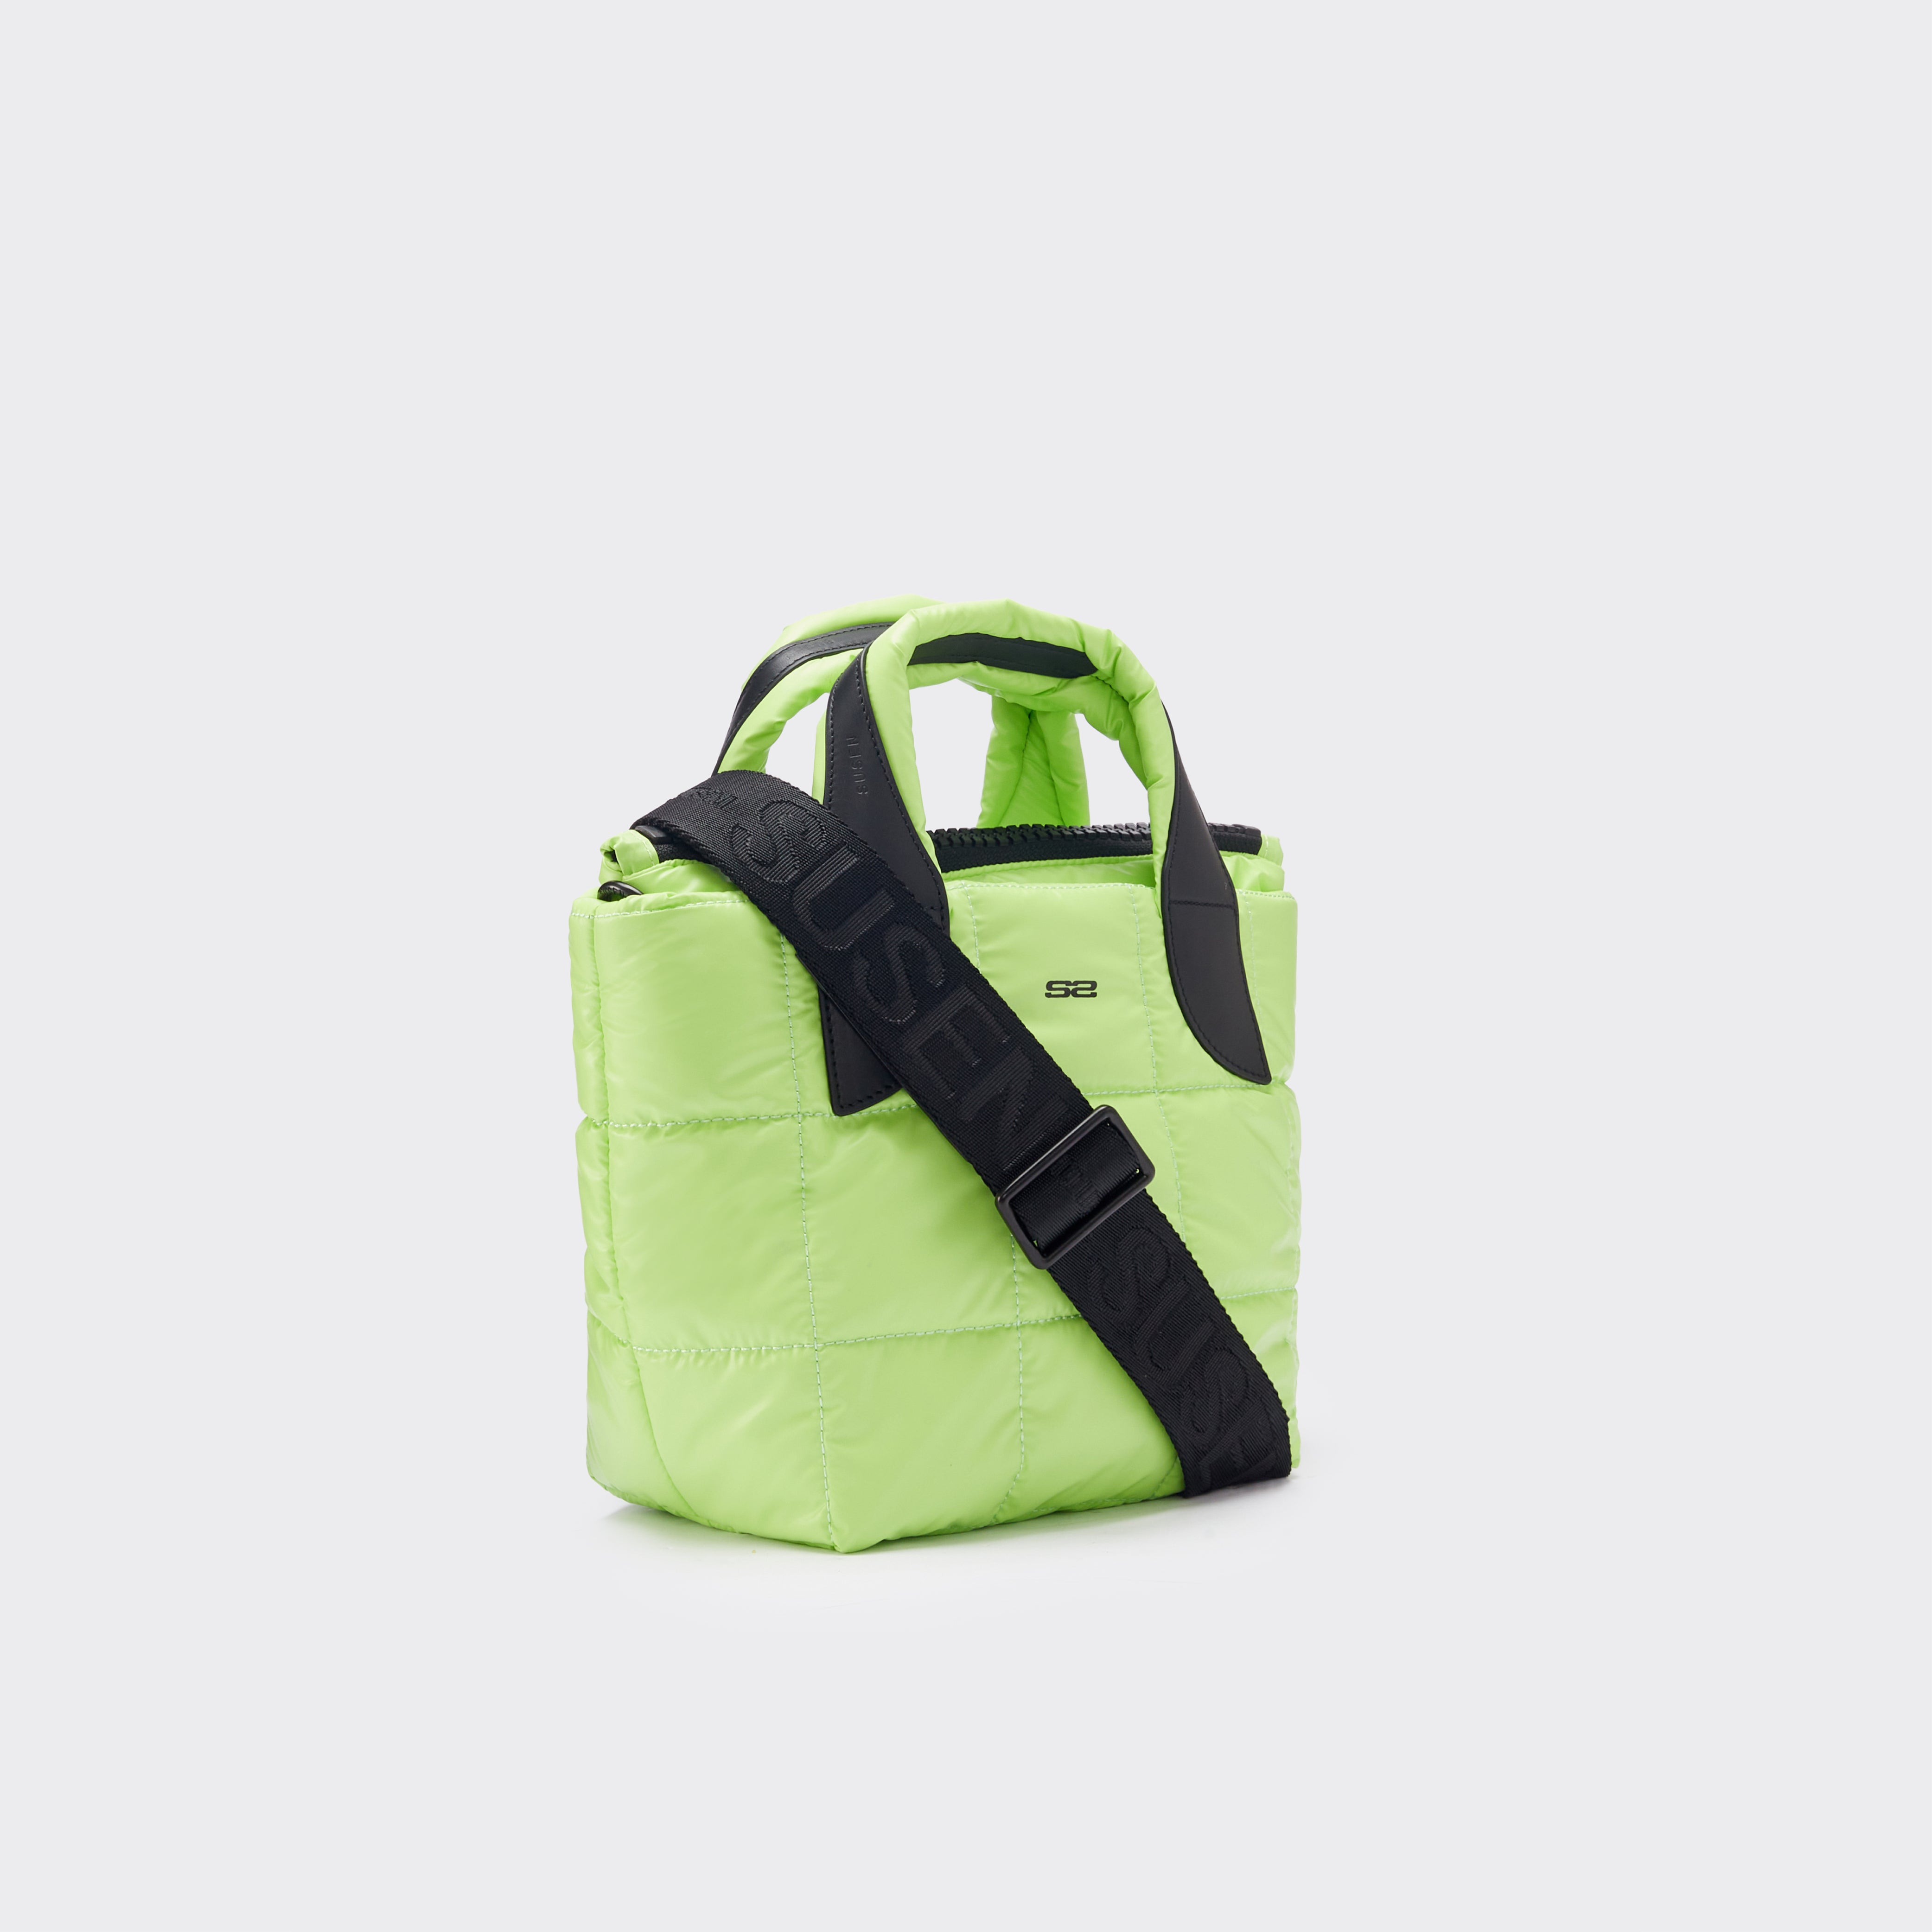 Raphael Small Size Tote - Green